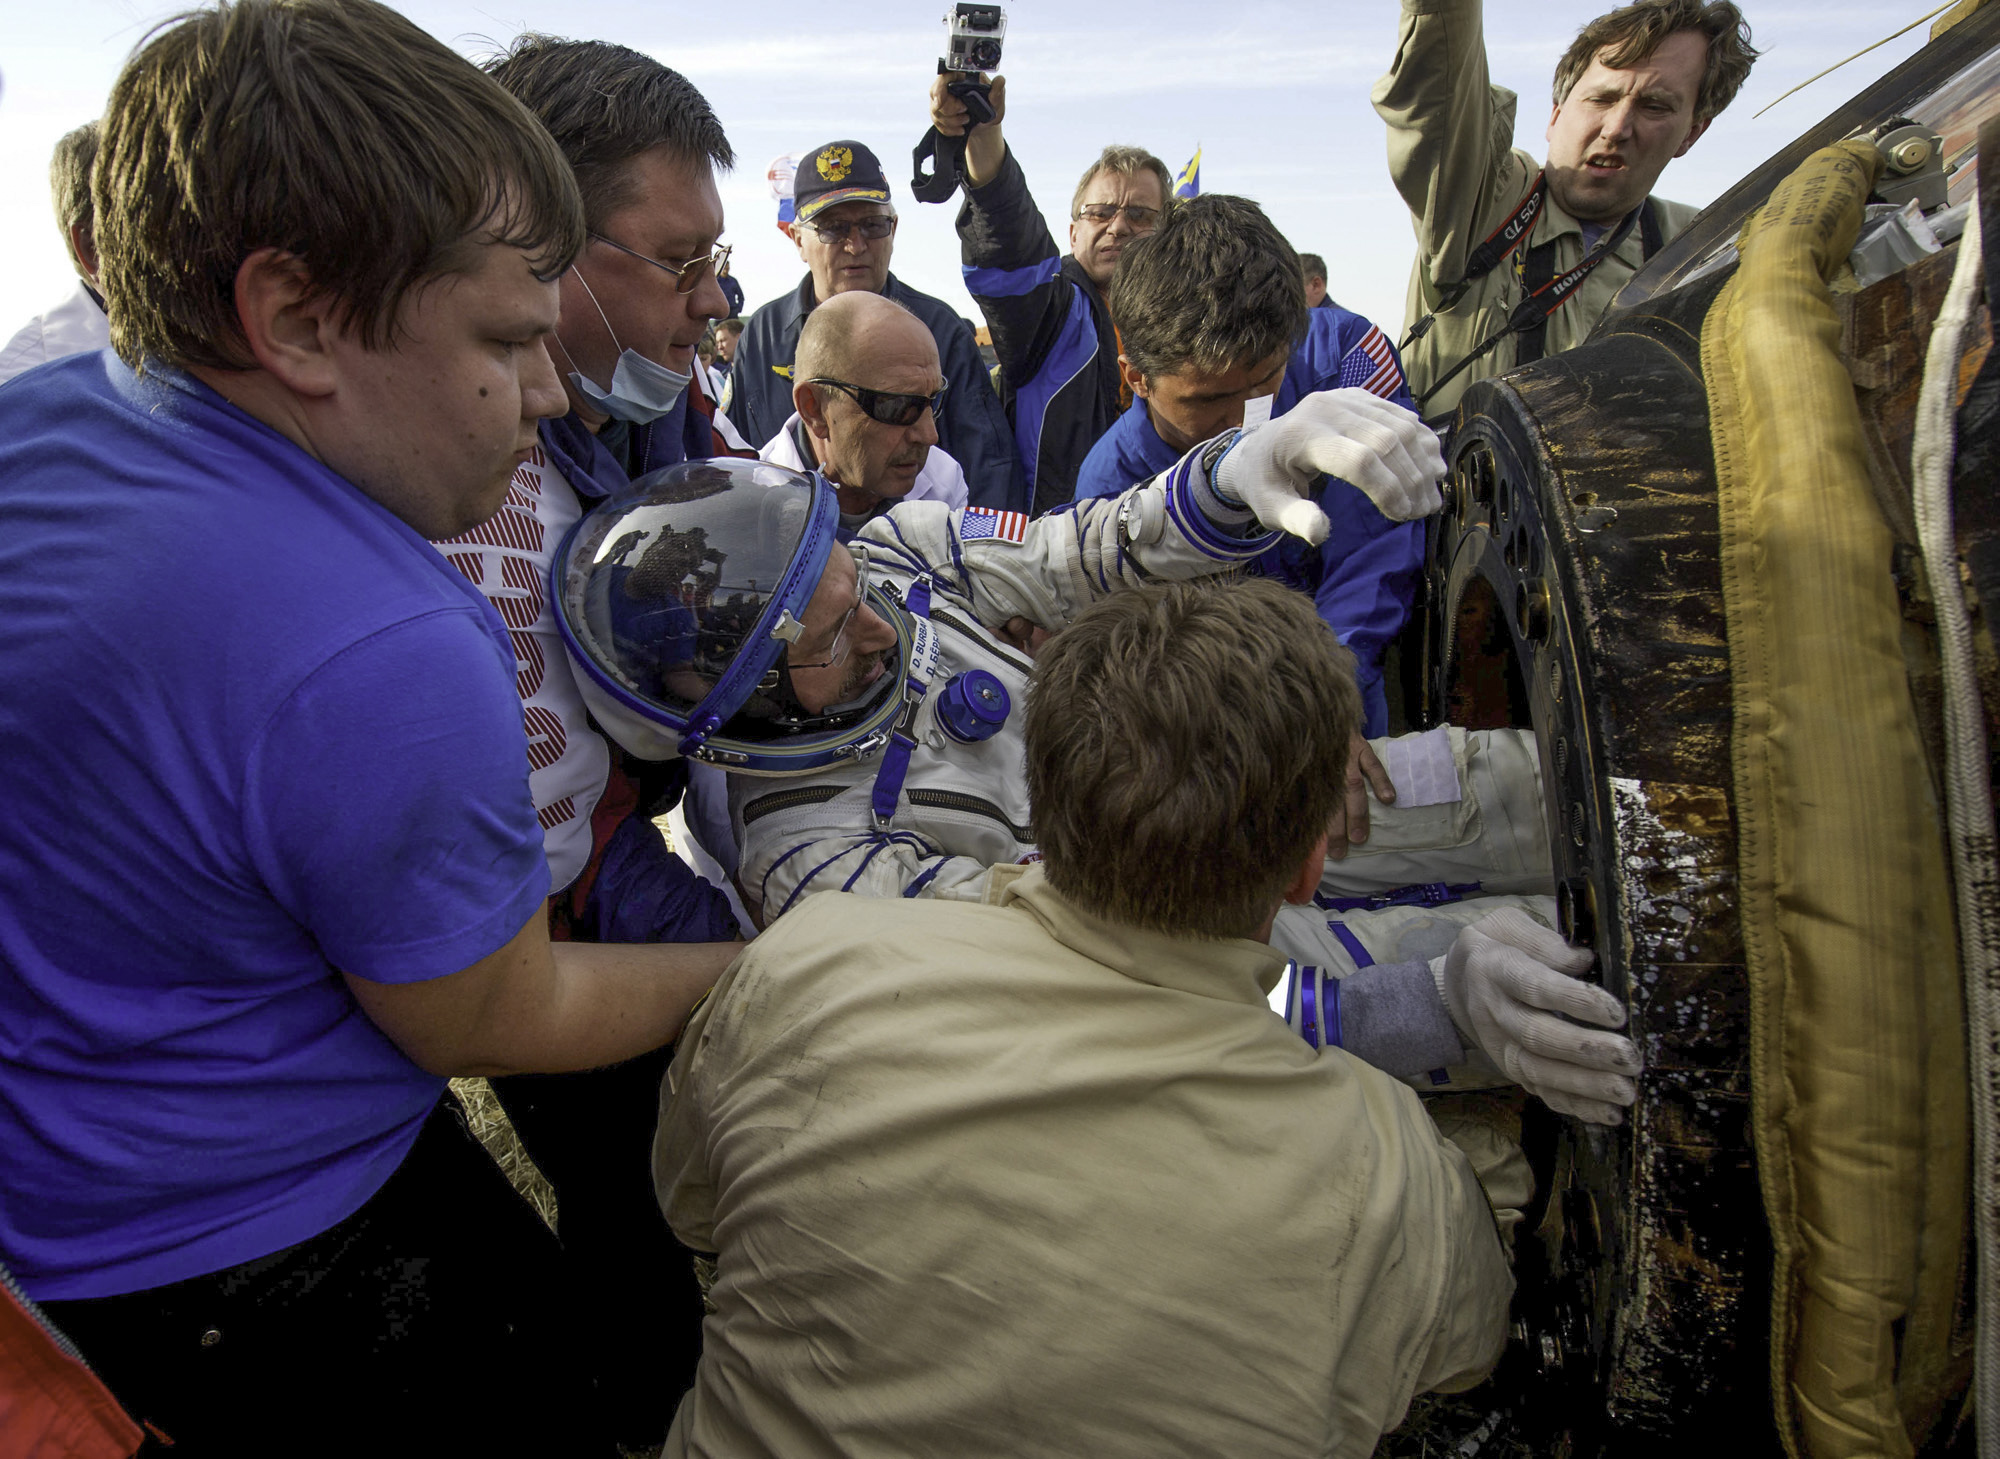  Expedition 30 Commander Dan Burbank is seen as he is extracted from the Soyuz TMA-22 spacecraft shortly after the capsule landed with Russian flight engineers Anton Shkaplerov and Anatoly Ivanishin in a remote area outside of the town of Arkalyk, Ka